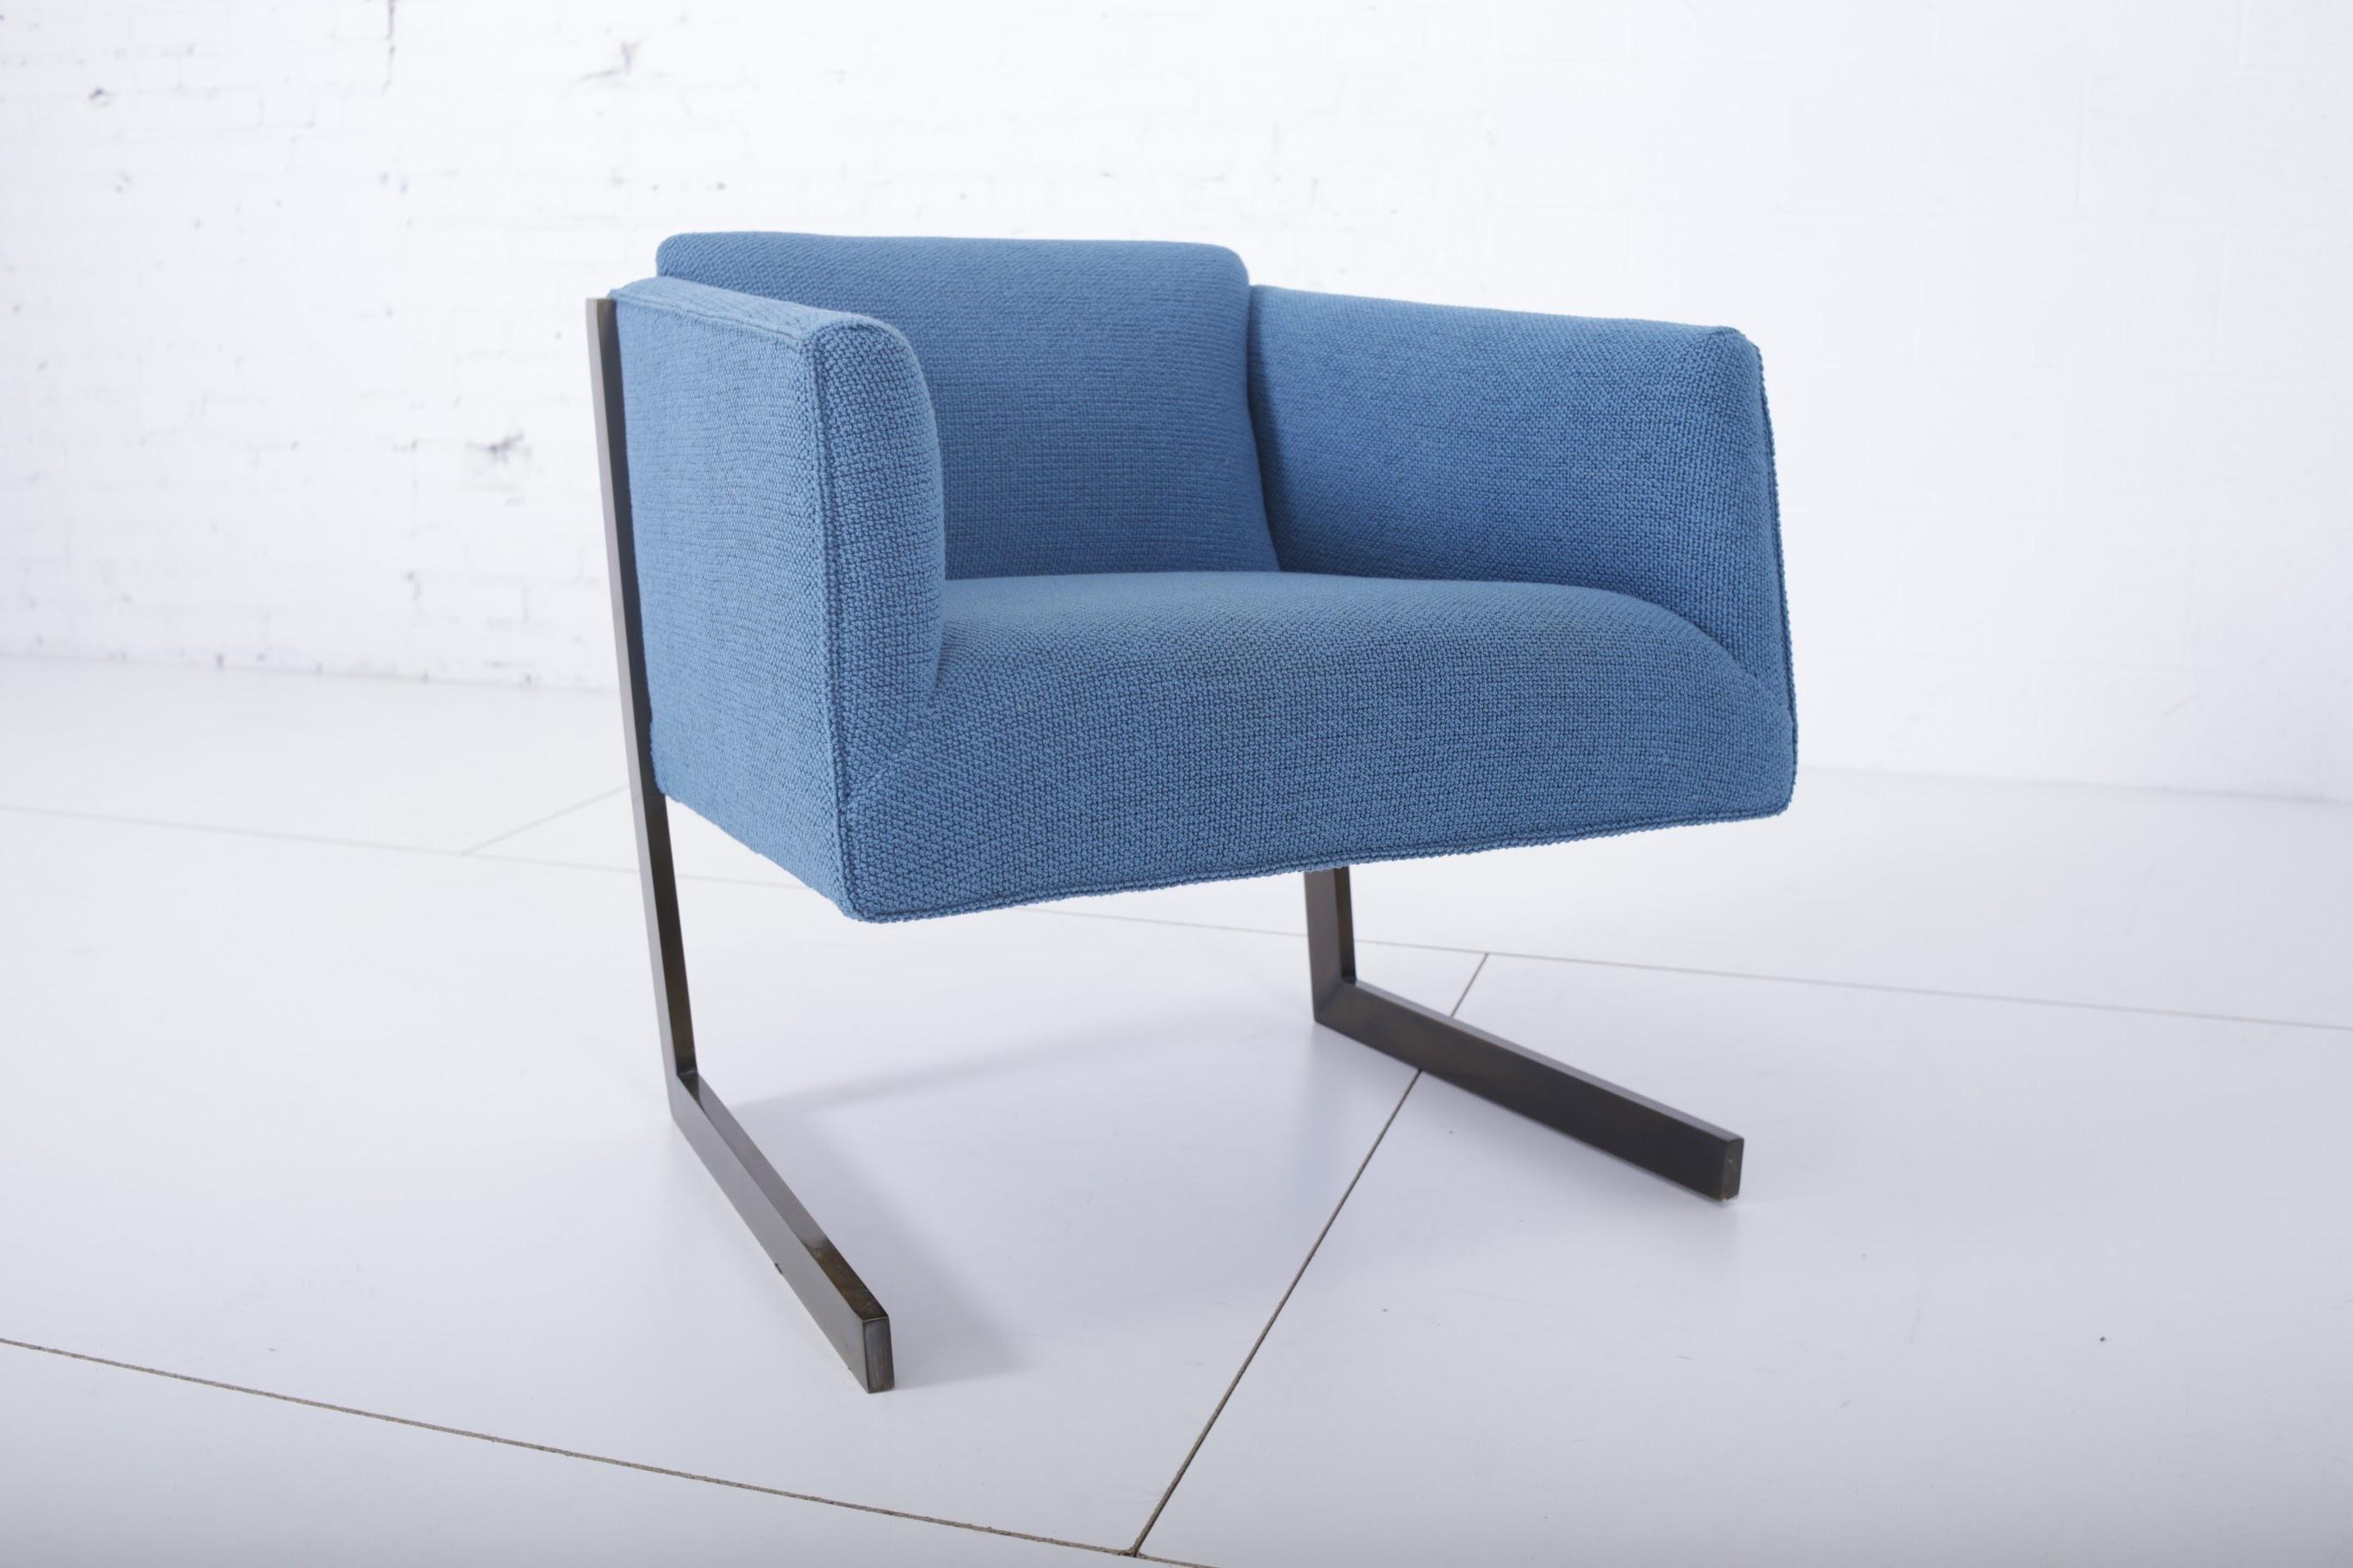 1970s bronze cantilever frame lounge chair newly upholstered in Knoll turquoise bouclé fabric.  Upholstered in Knoll blue boucle.